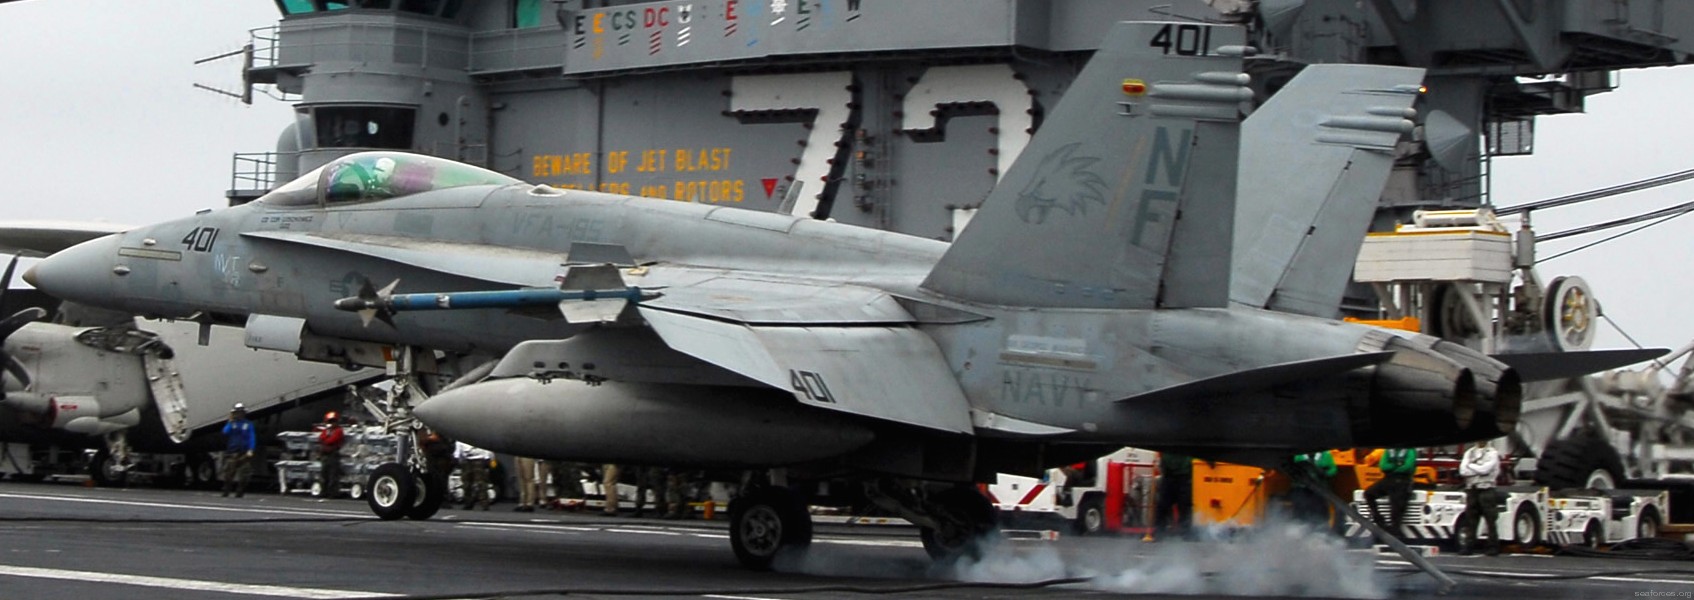 vfa-195 dambusters strike fighter squadron navy f/a-18c hornet carrier air wing cvw-5 uss george washington cvn-73 51